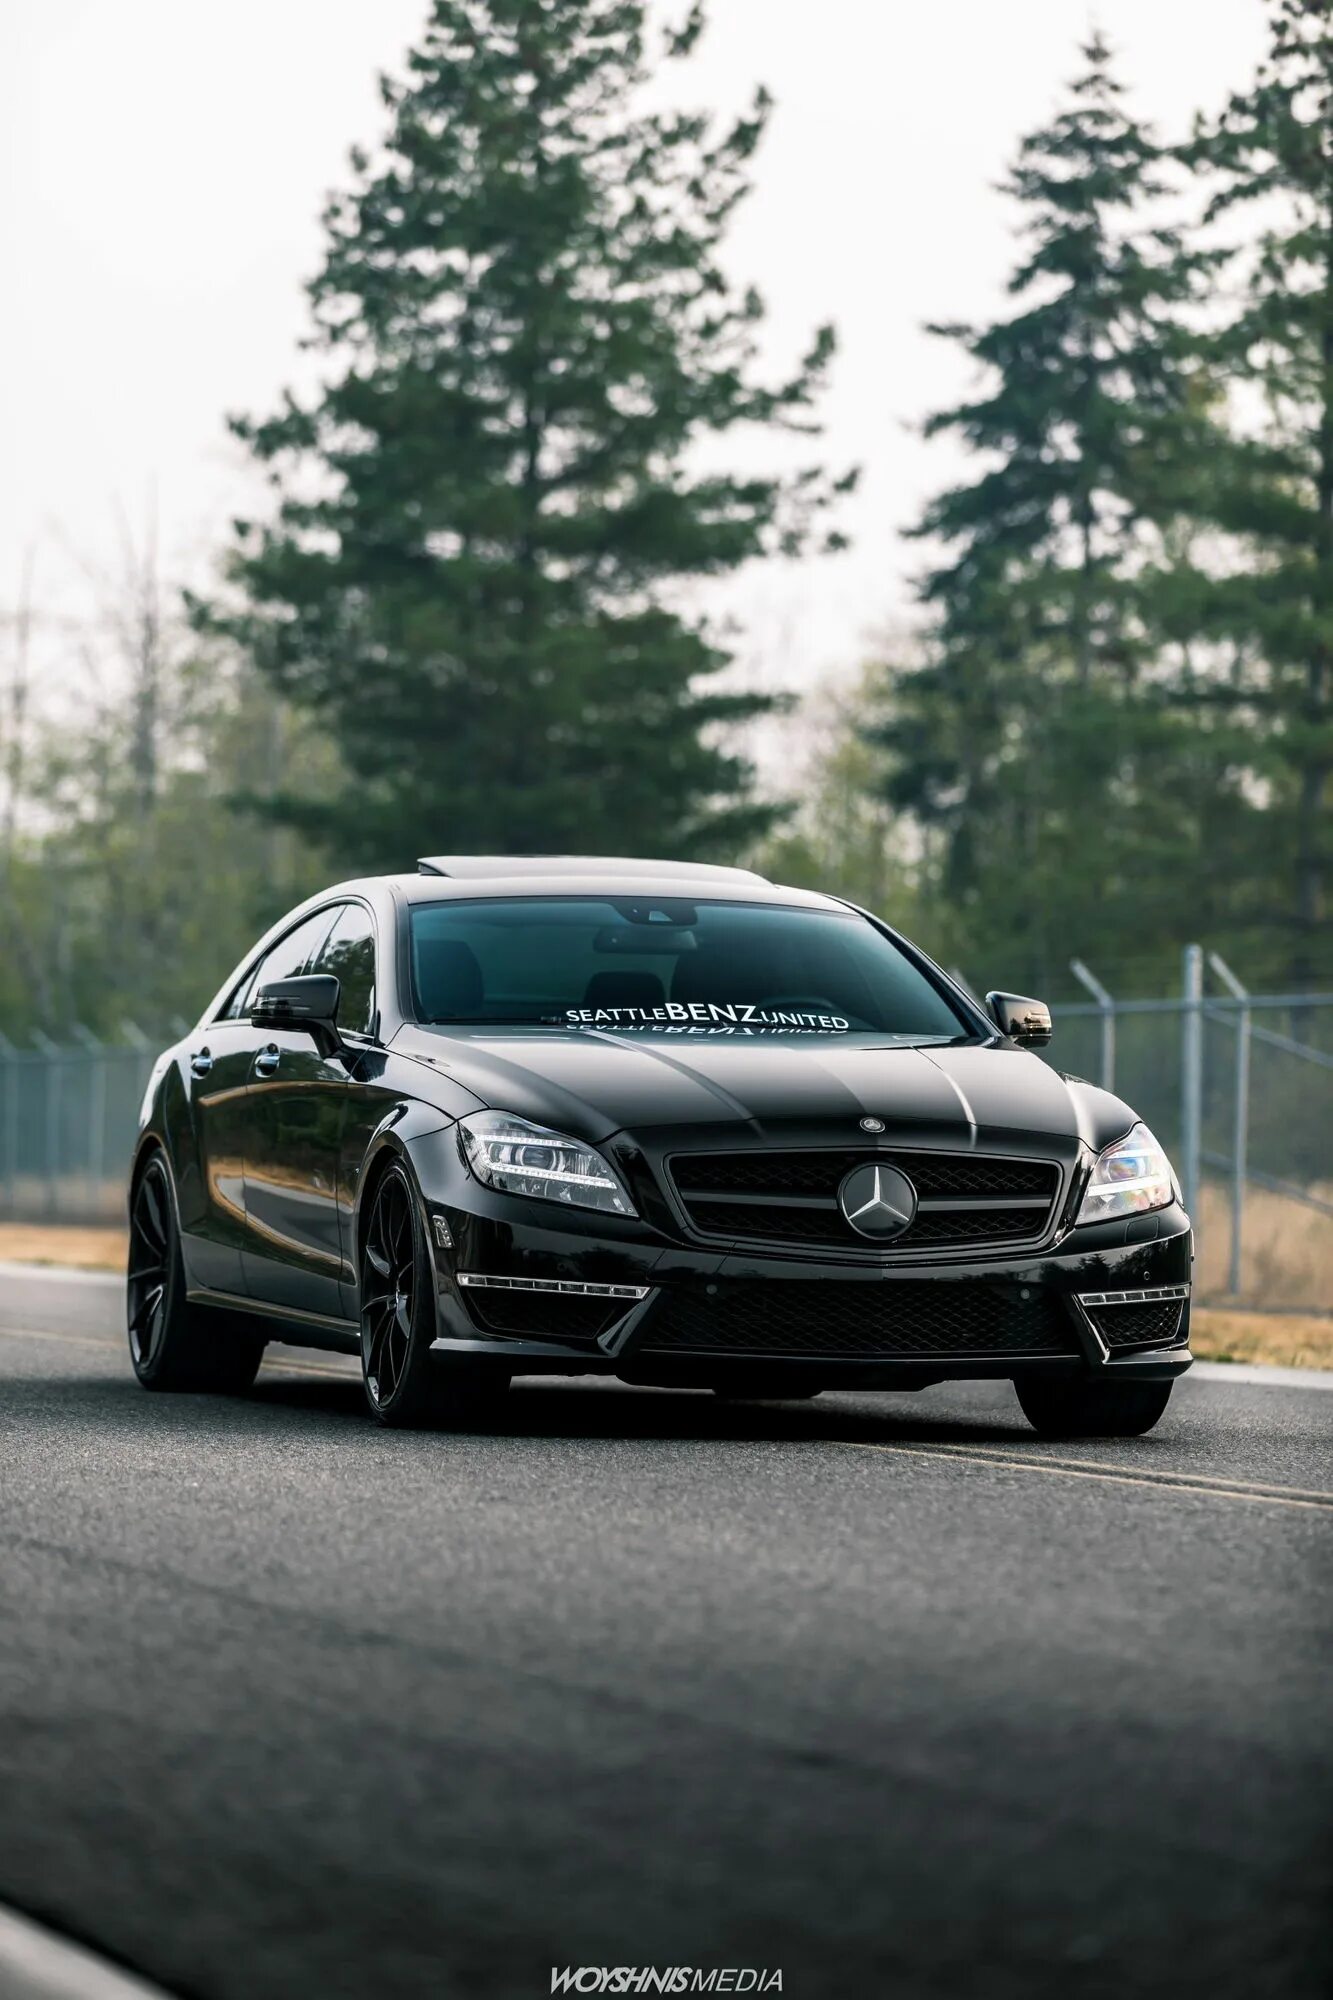 Mercedes CLS 63 AMG. Mercedes Benz CLS 63 AMG 2021. Мерседес ЦЛС 63 АМГ. Мерседес CLS 63 Брабус.